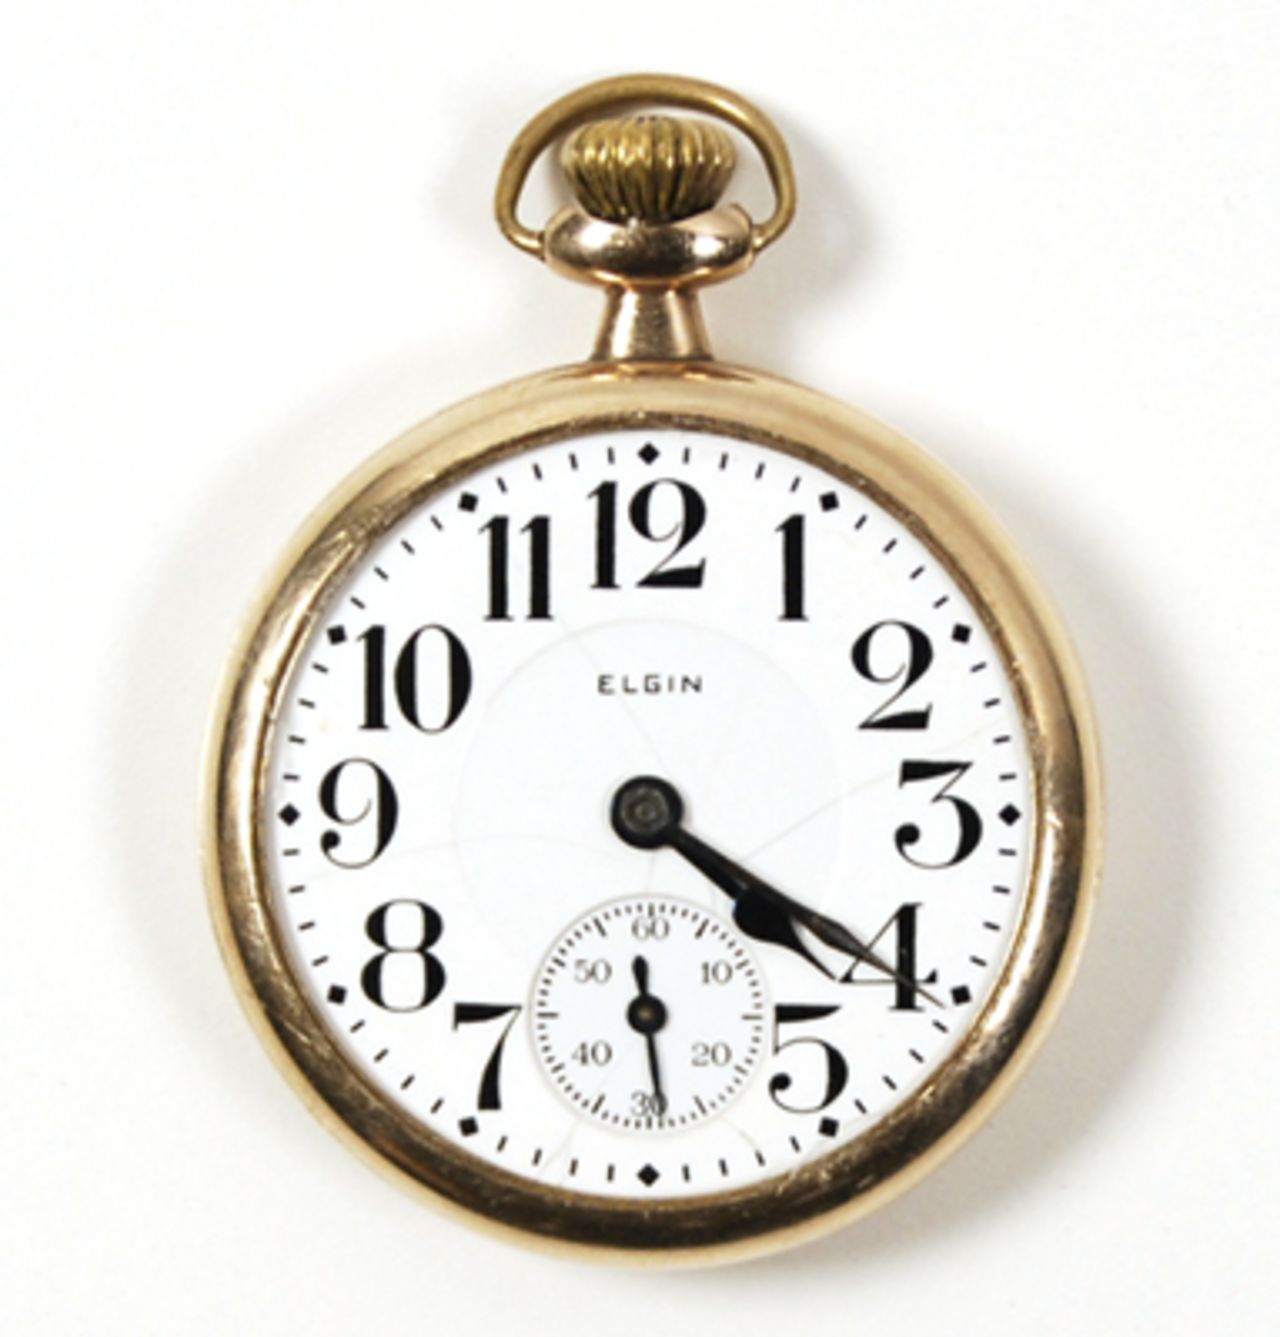 Clyde Barrow was wearing this pocket watch when he was shot.